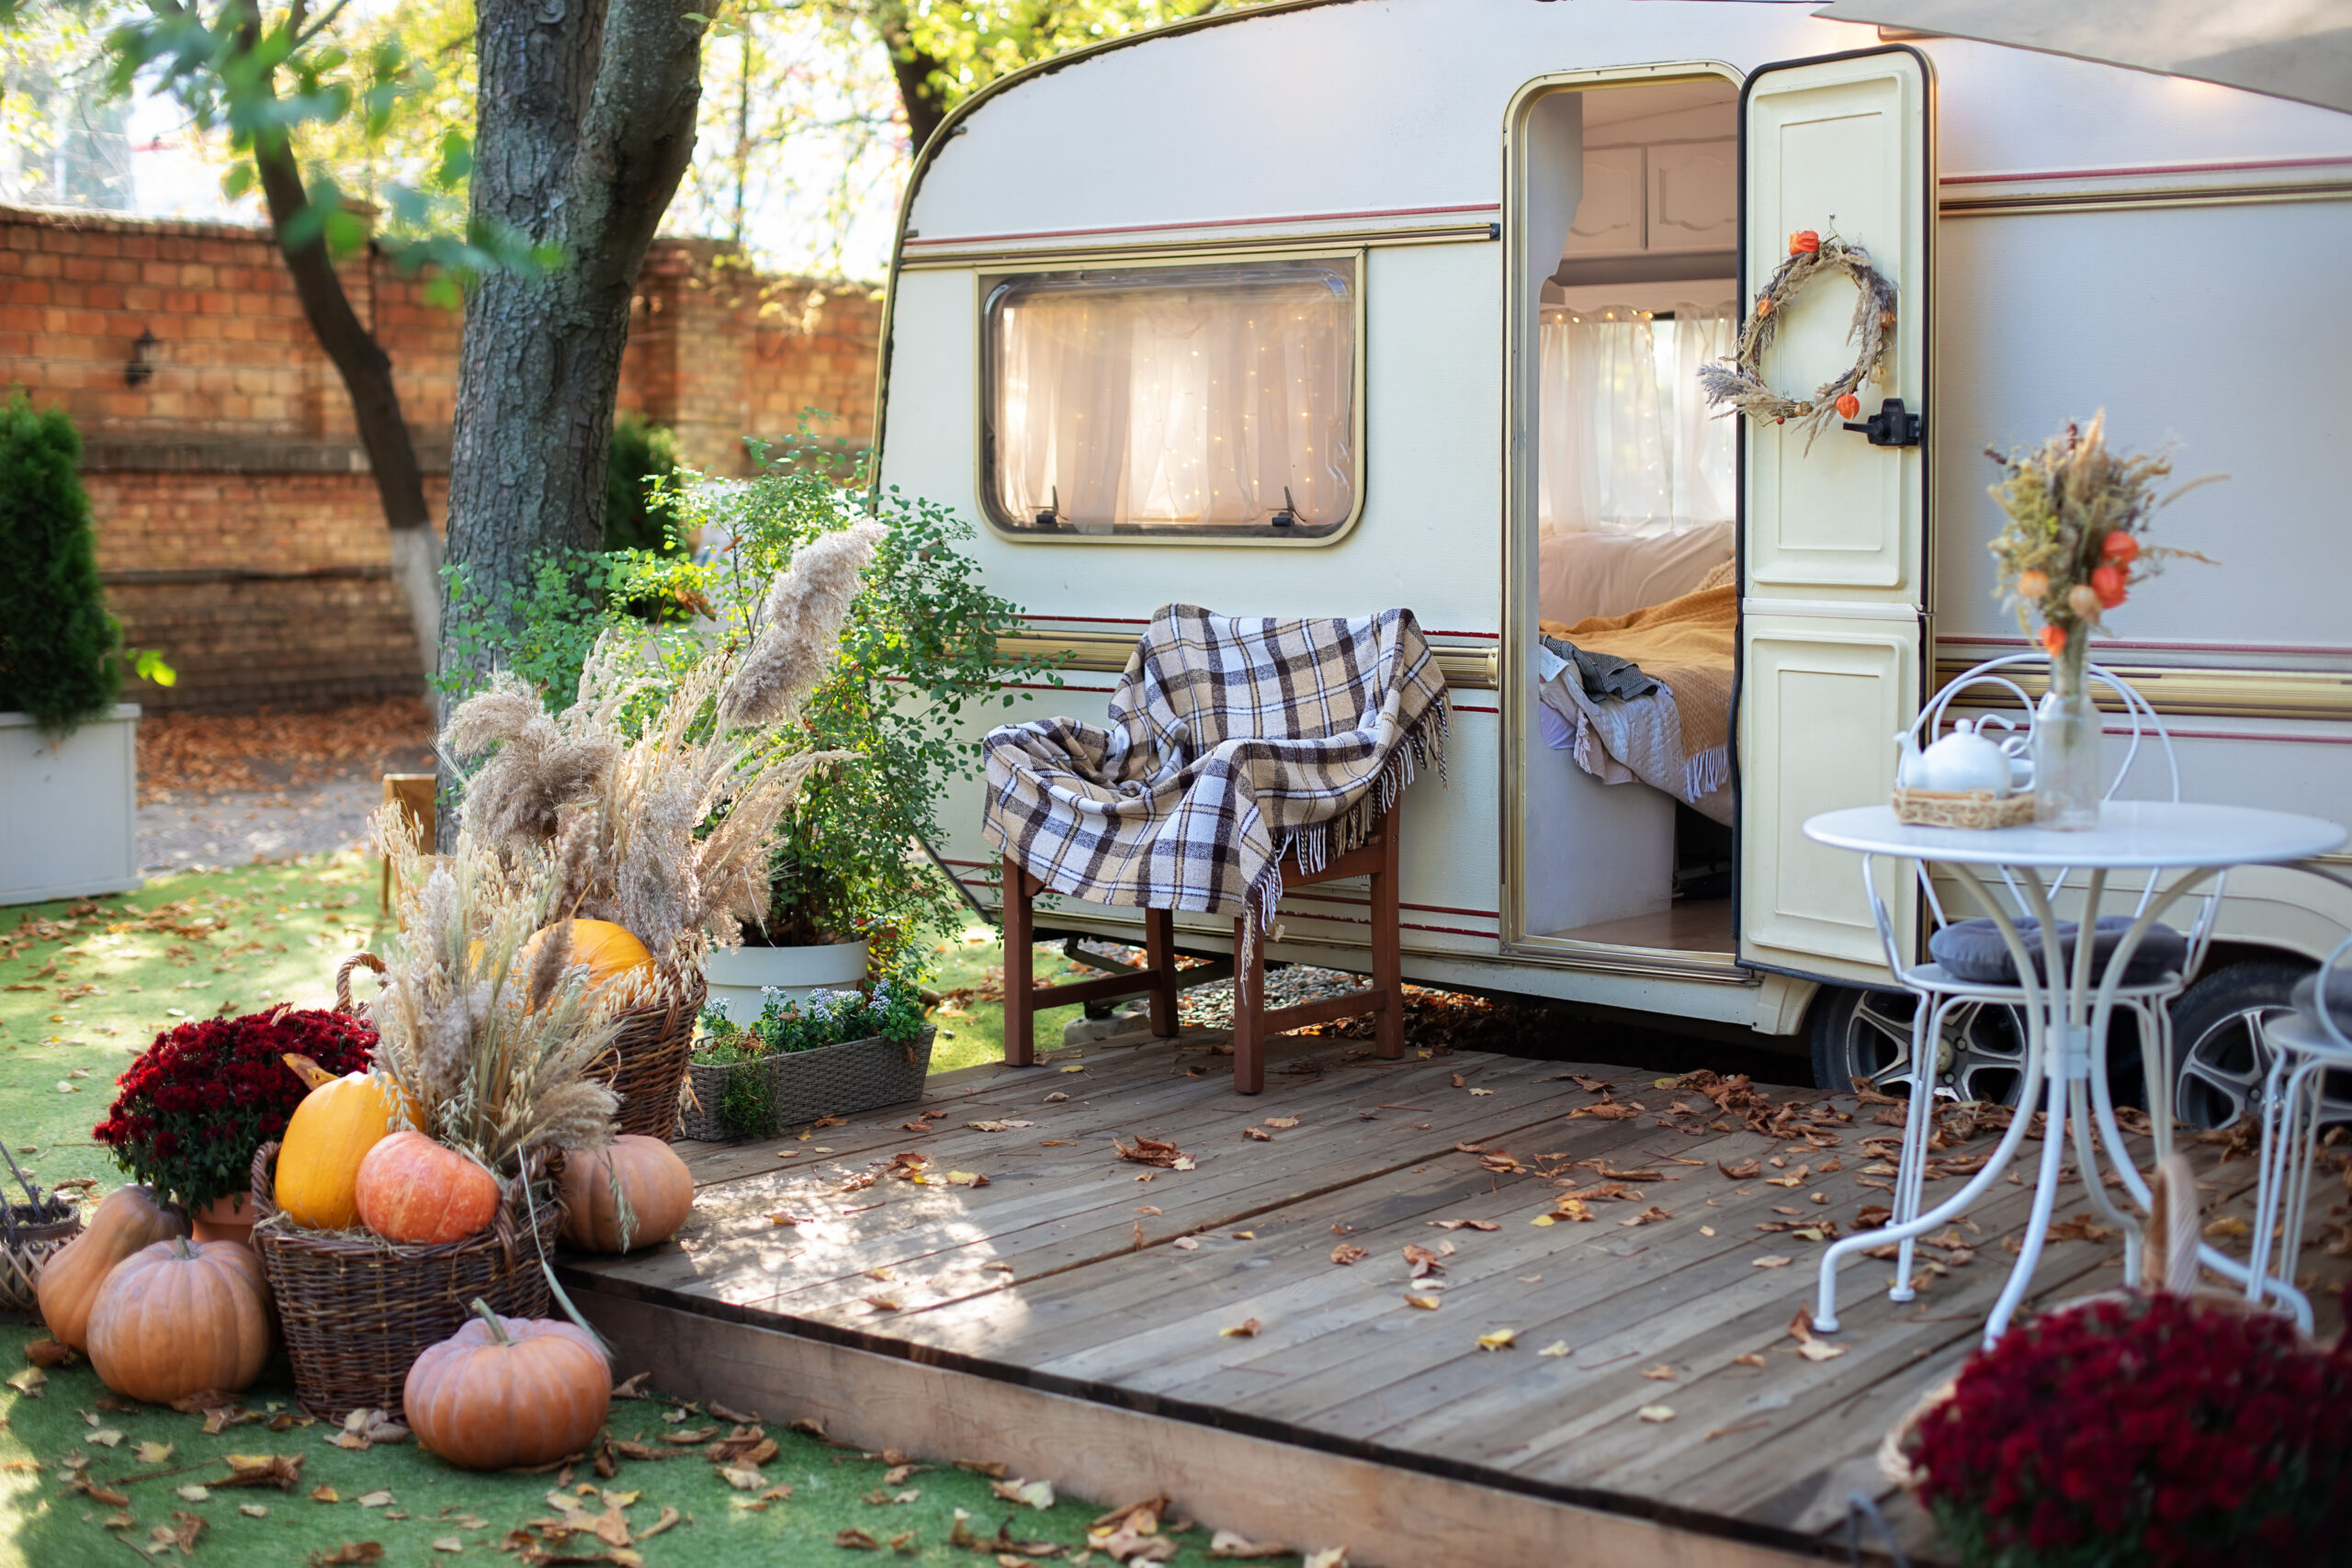 Vintage camper with wooden deck in front decorated with fall themed decorations - RV deck ideas